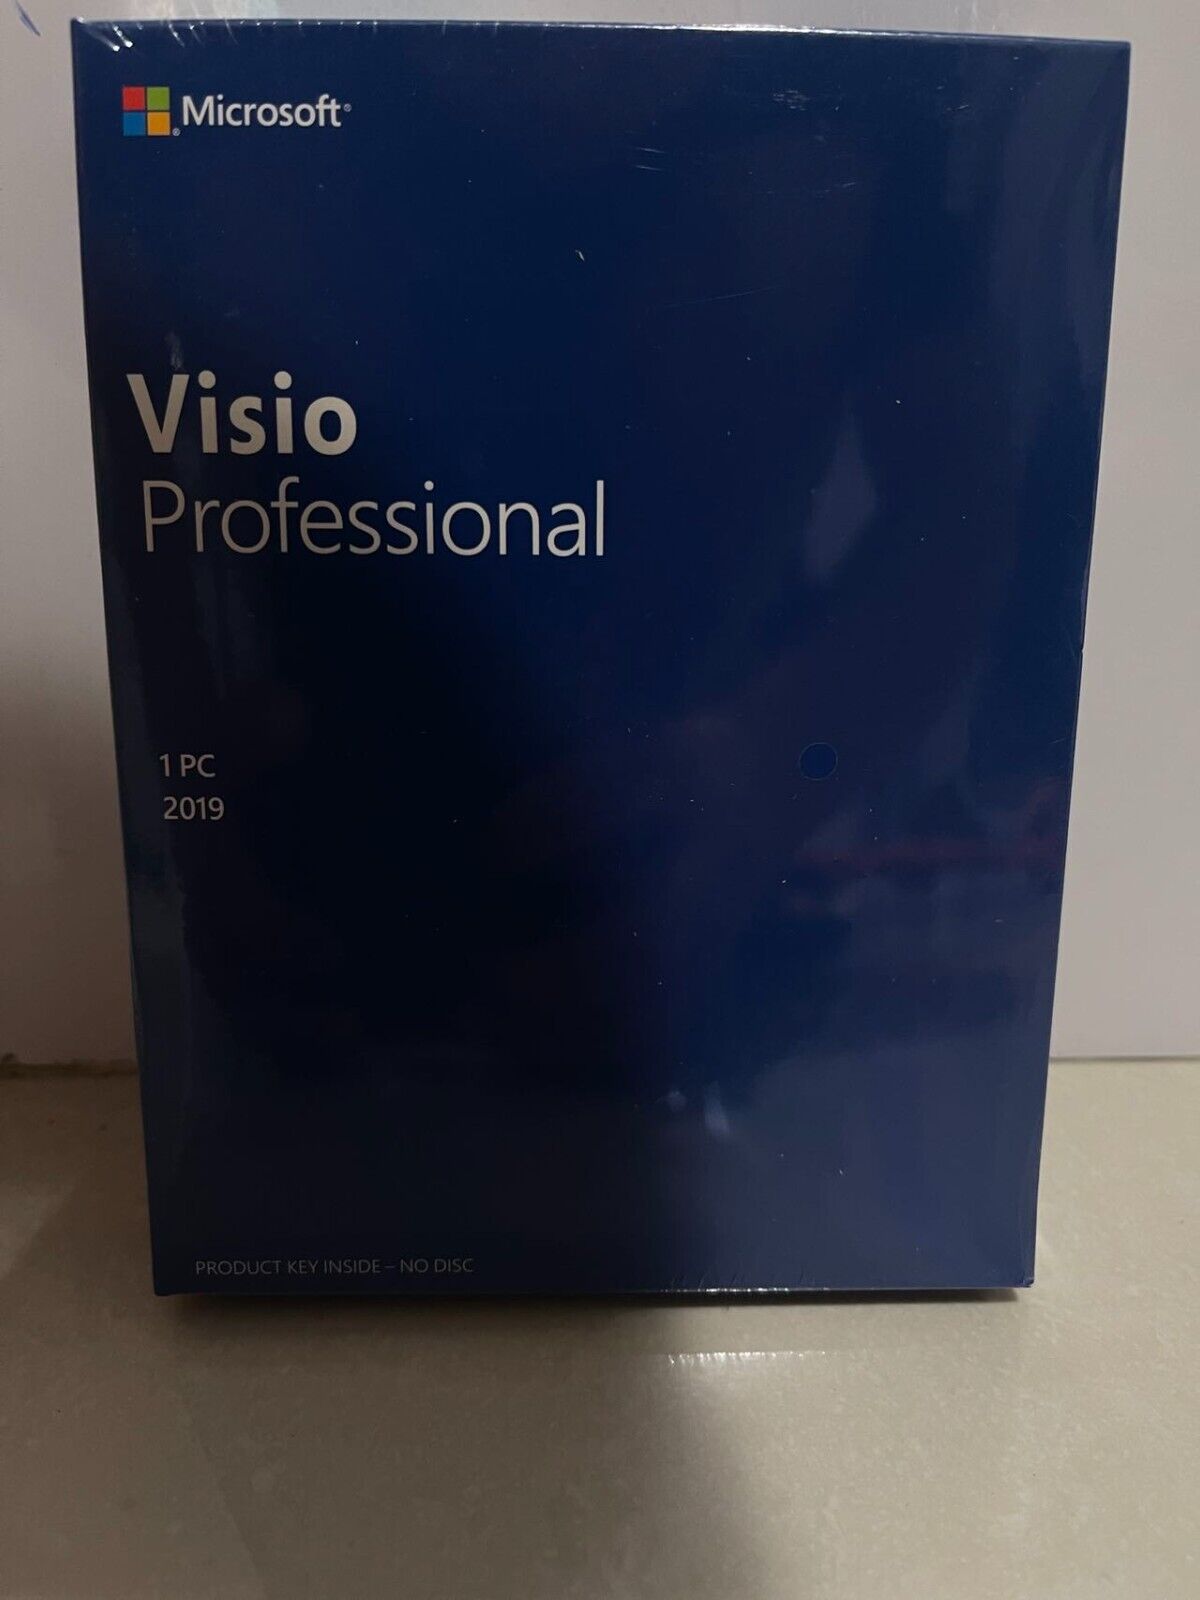 Microsoft Visio 2019 Professional, Brand New and Sealed